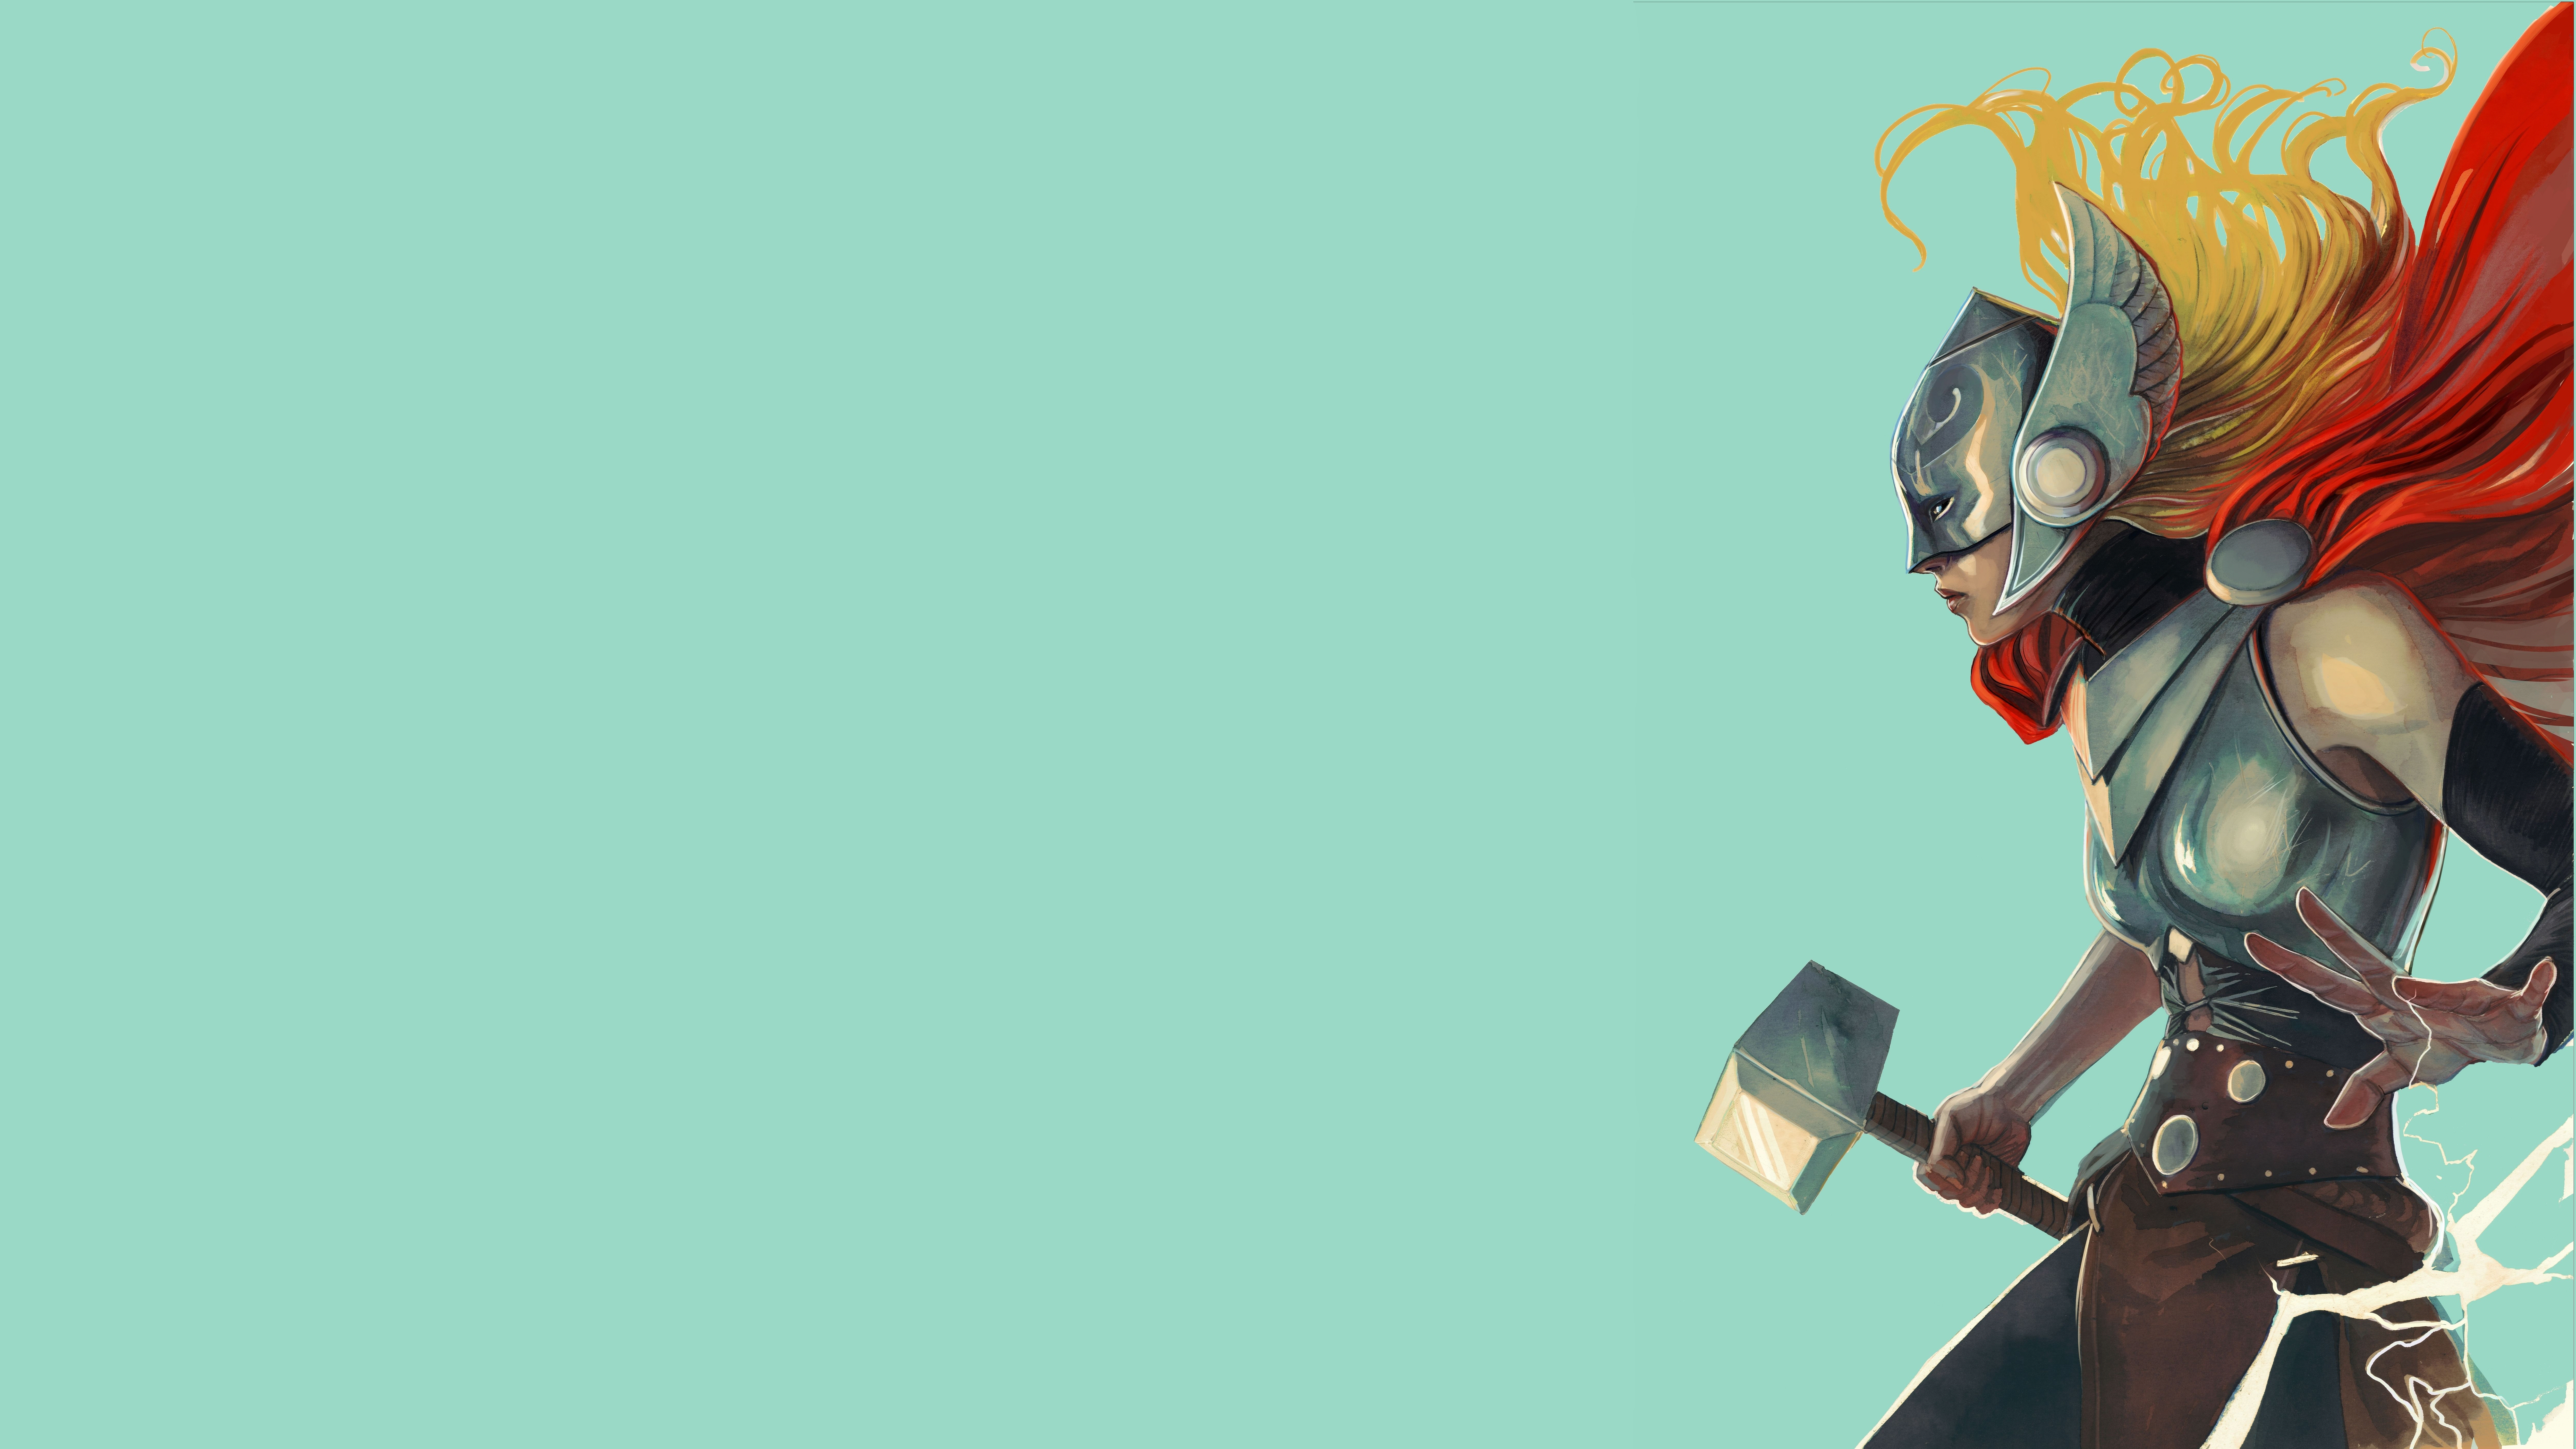 3 Lady Thor HD Wallpapers | Backgrounds - Wallpaper Abyss